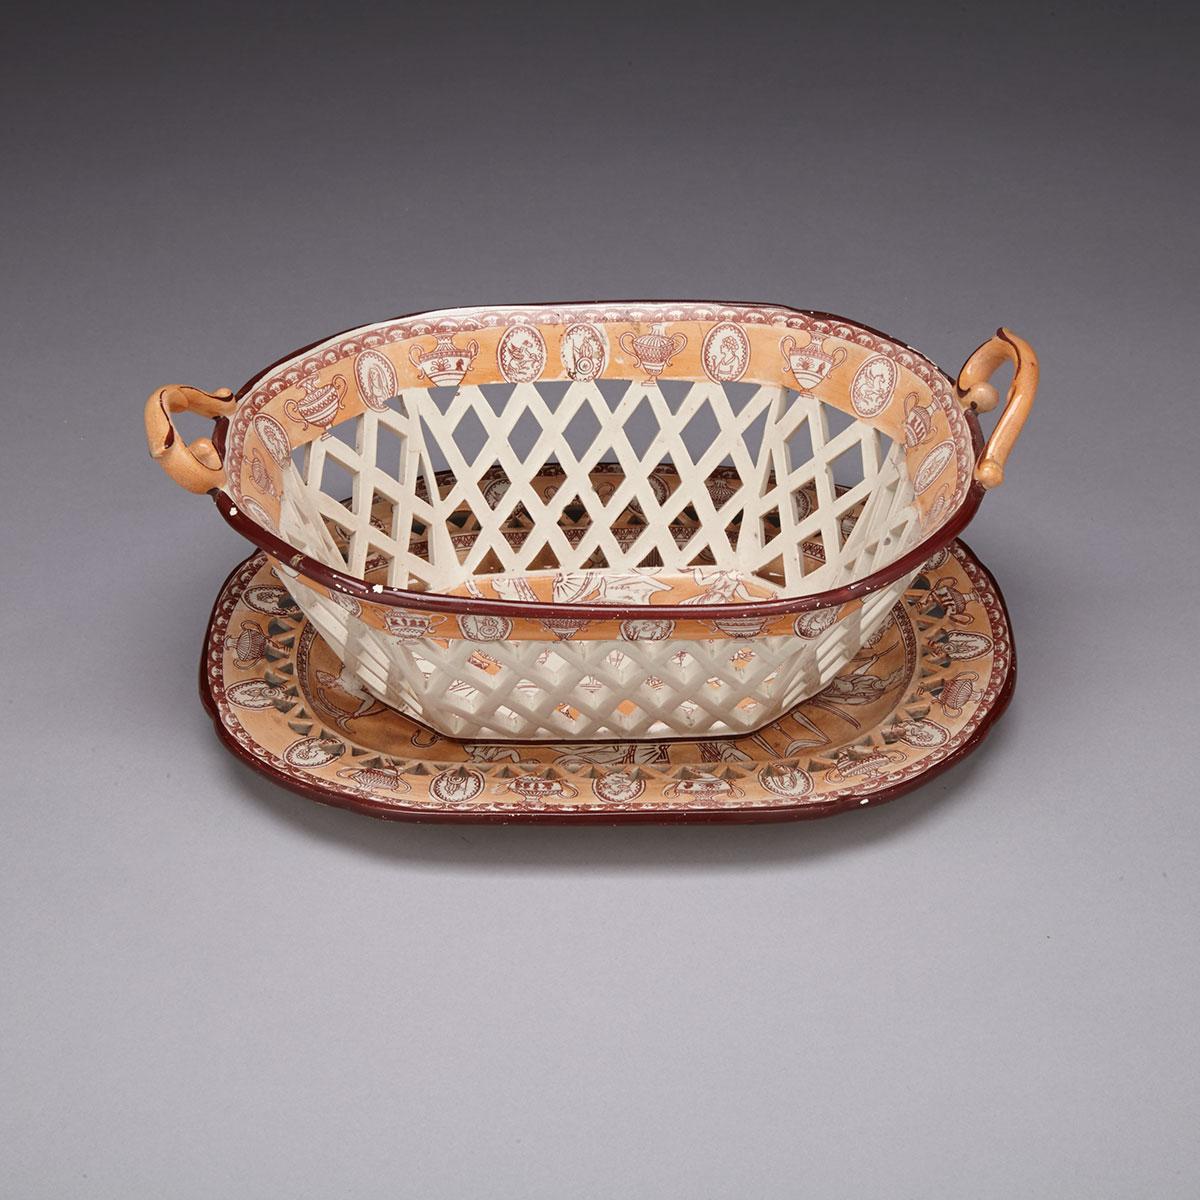 English Pearlware Oblong Chesnut Basket and Stand, c.1800